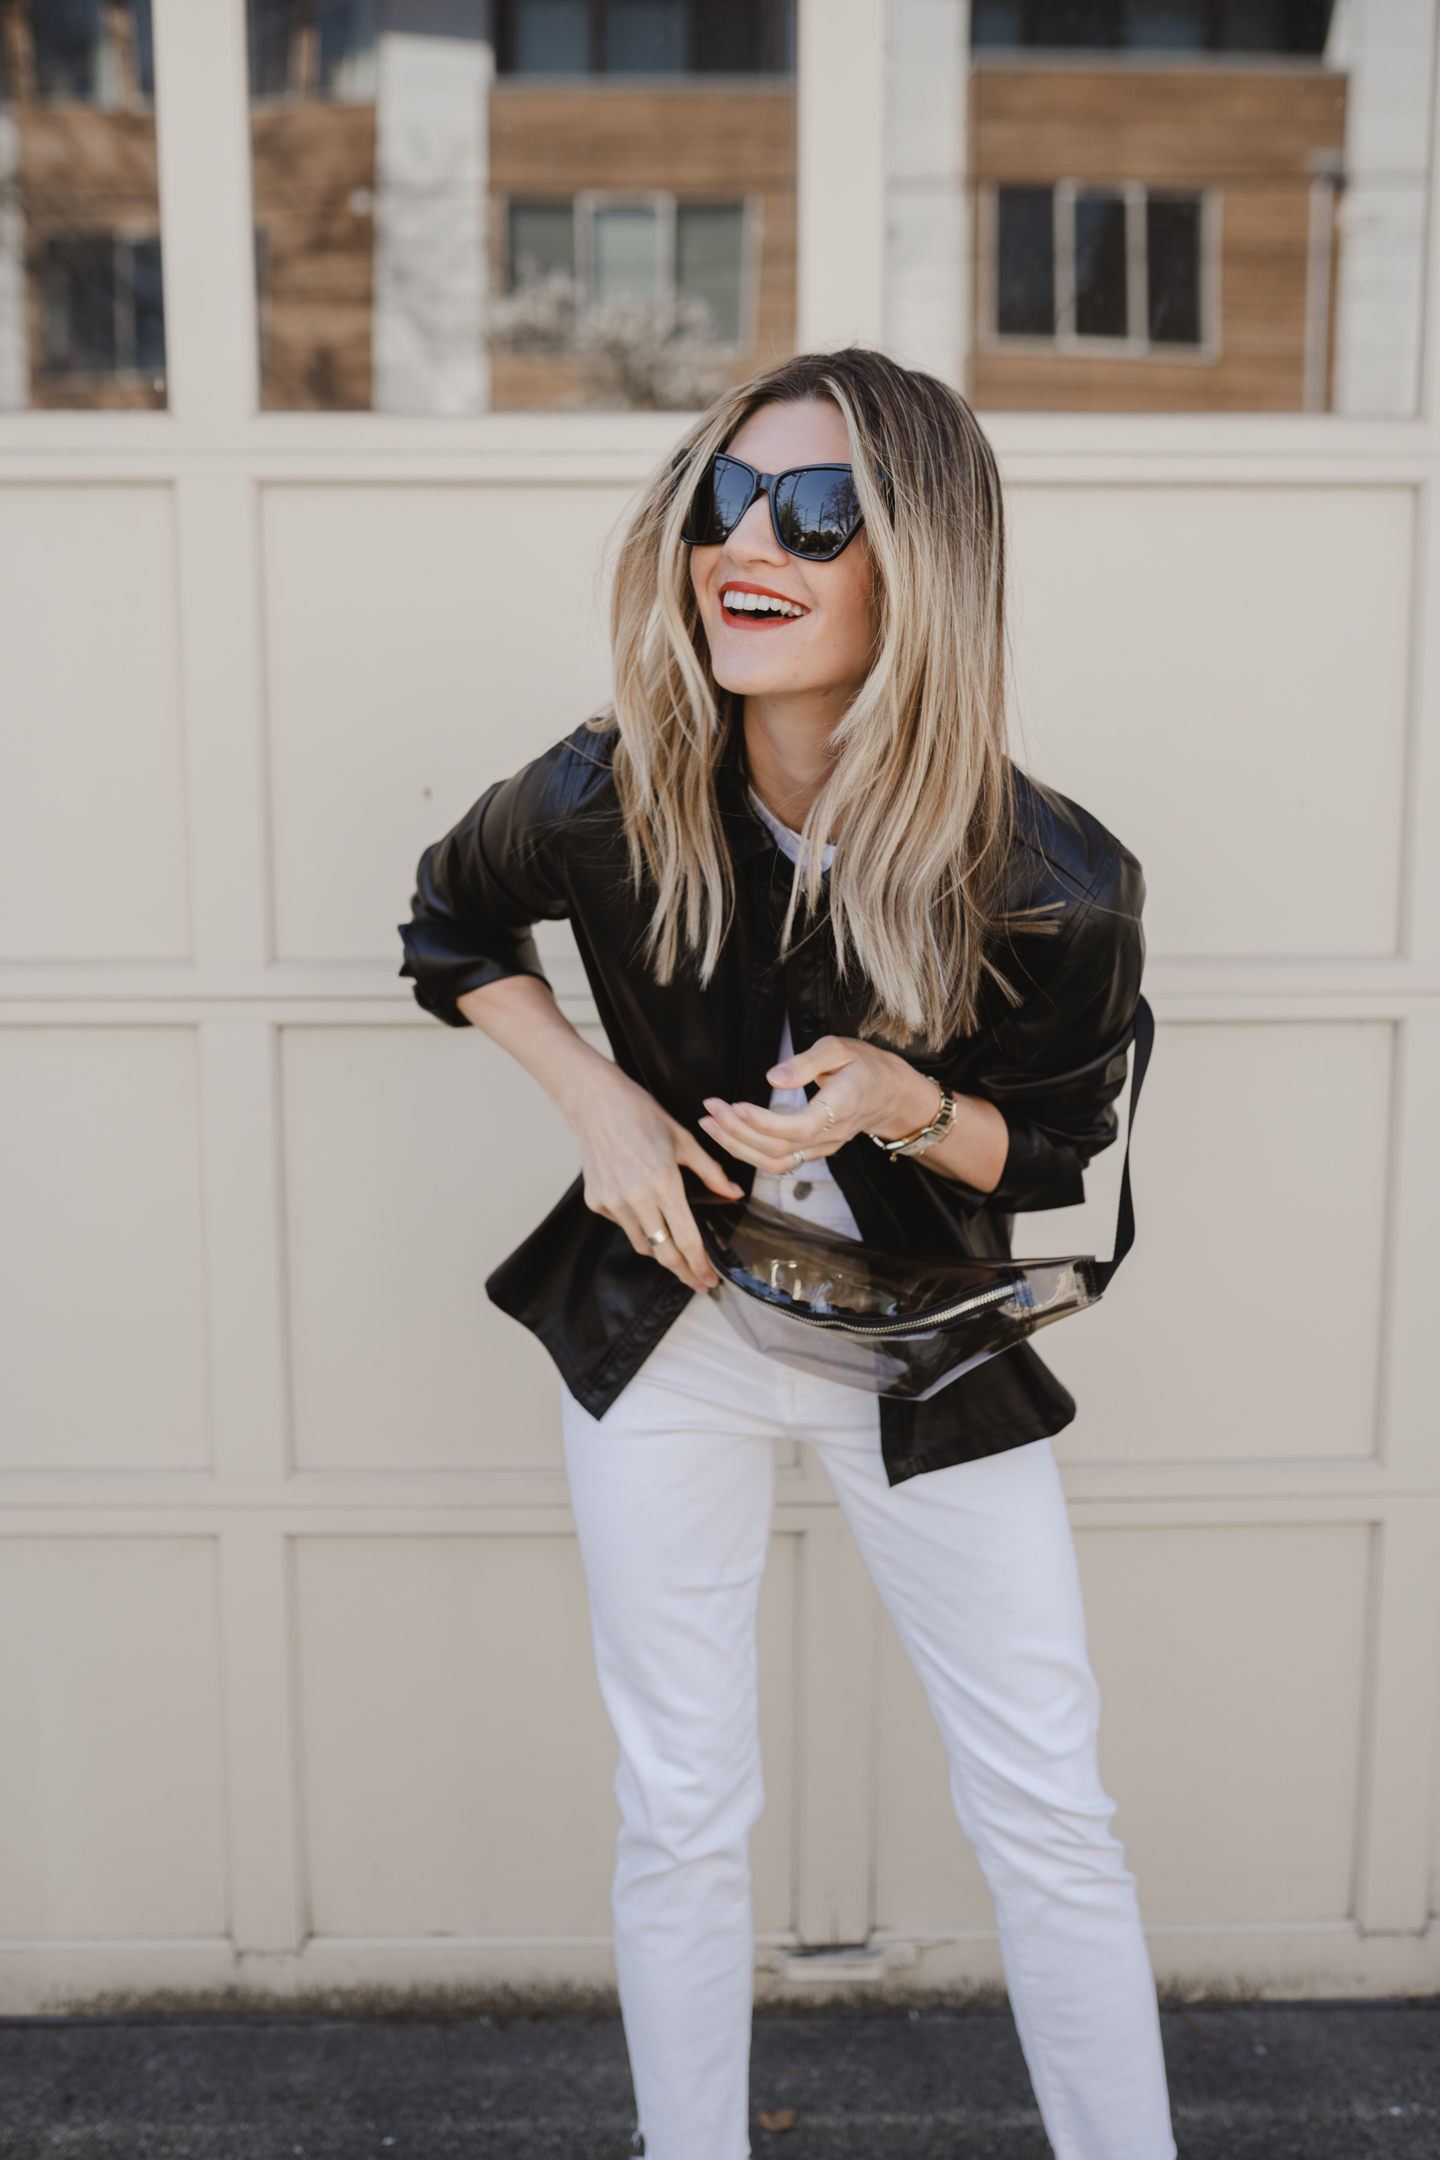 The Grey Edit - Cortney Bigelow - Seattle Lifestyle Blogger - April Stylelogue - Seattle Bloggers - Trend Story - Vegan Leather Separates